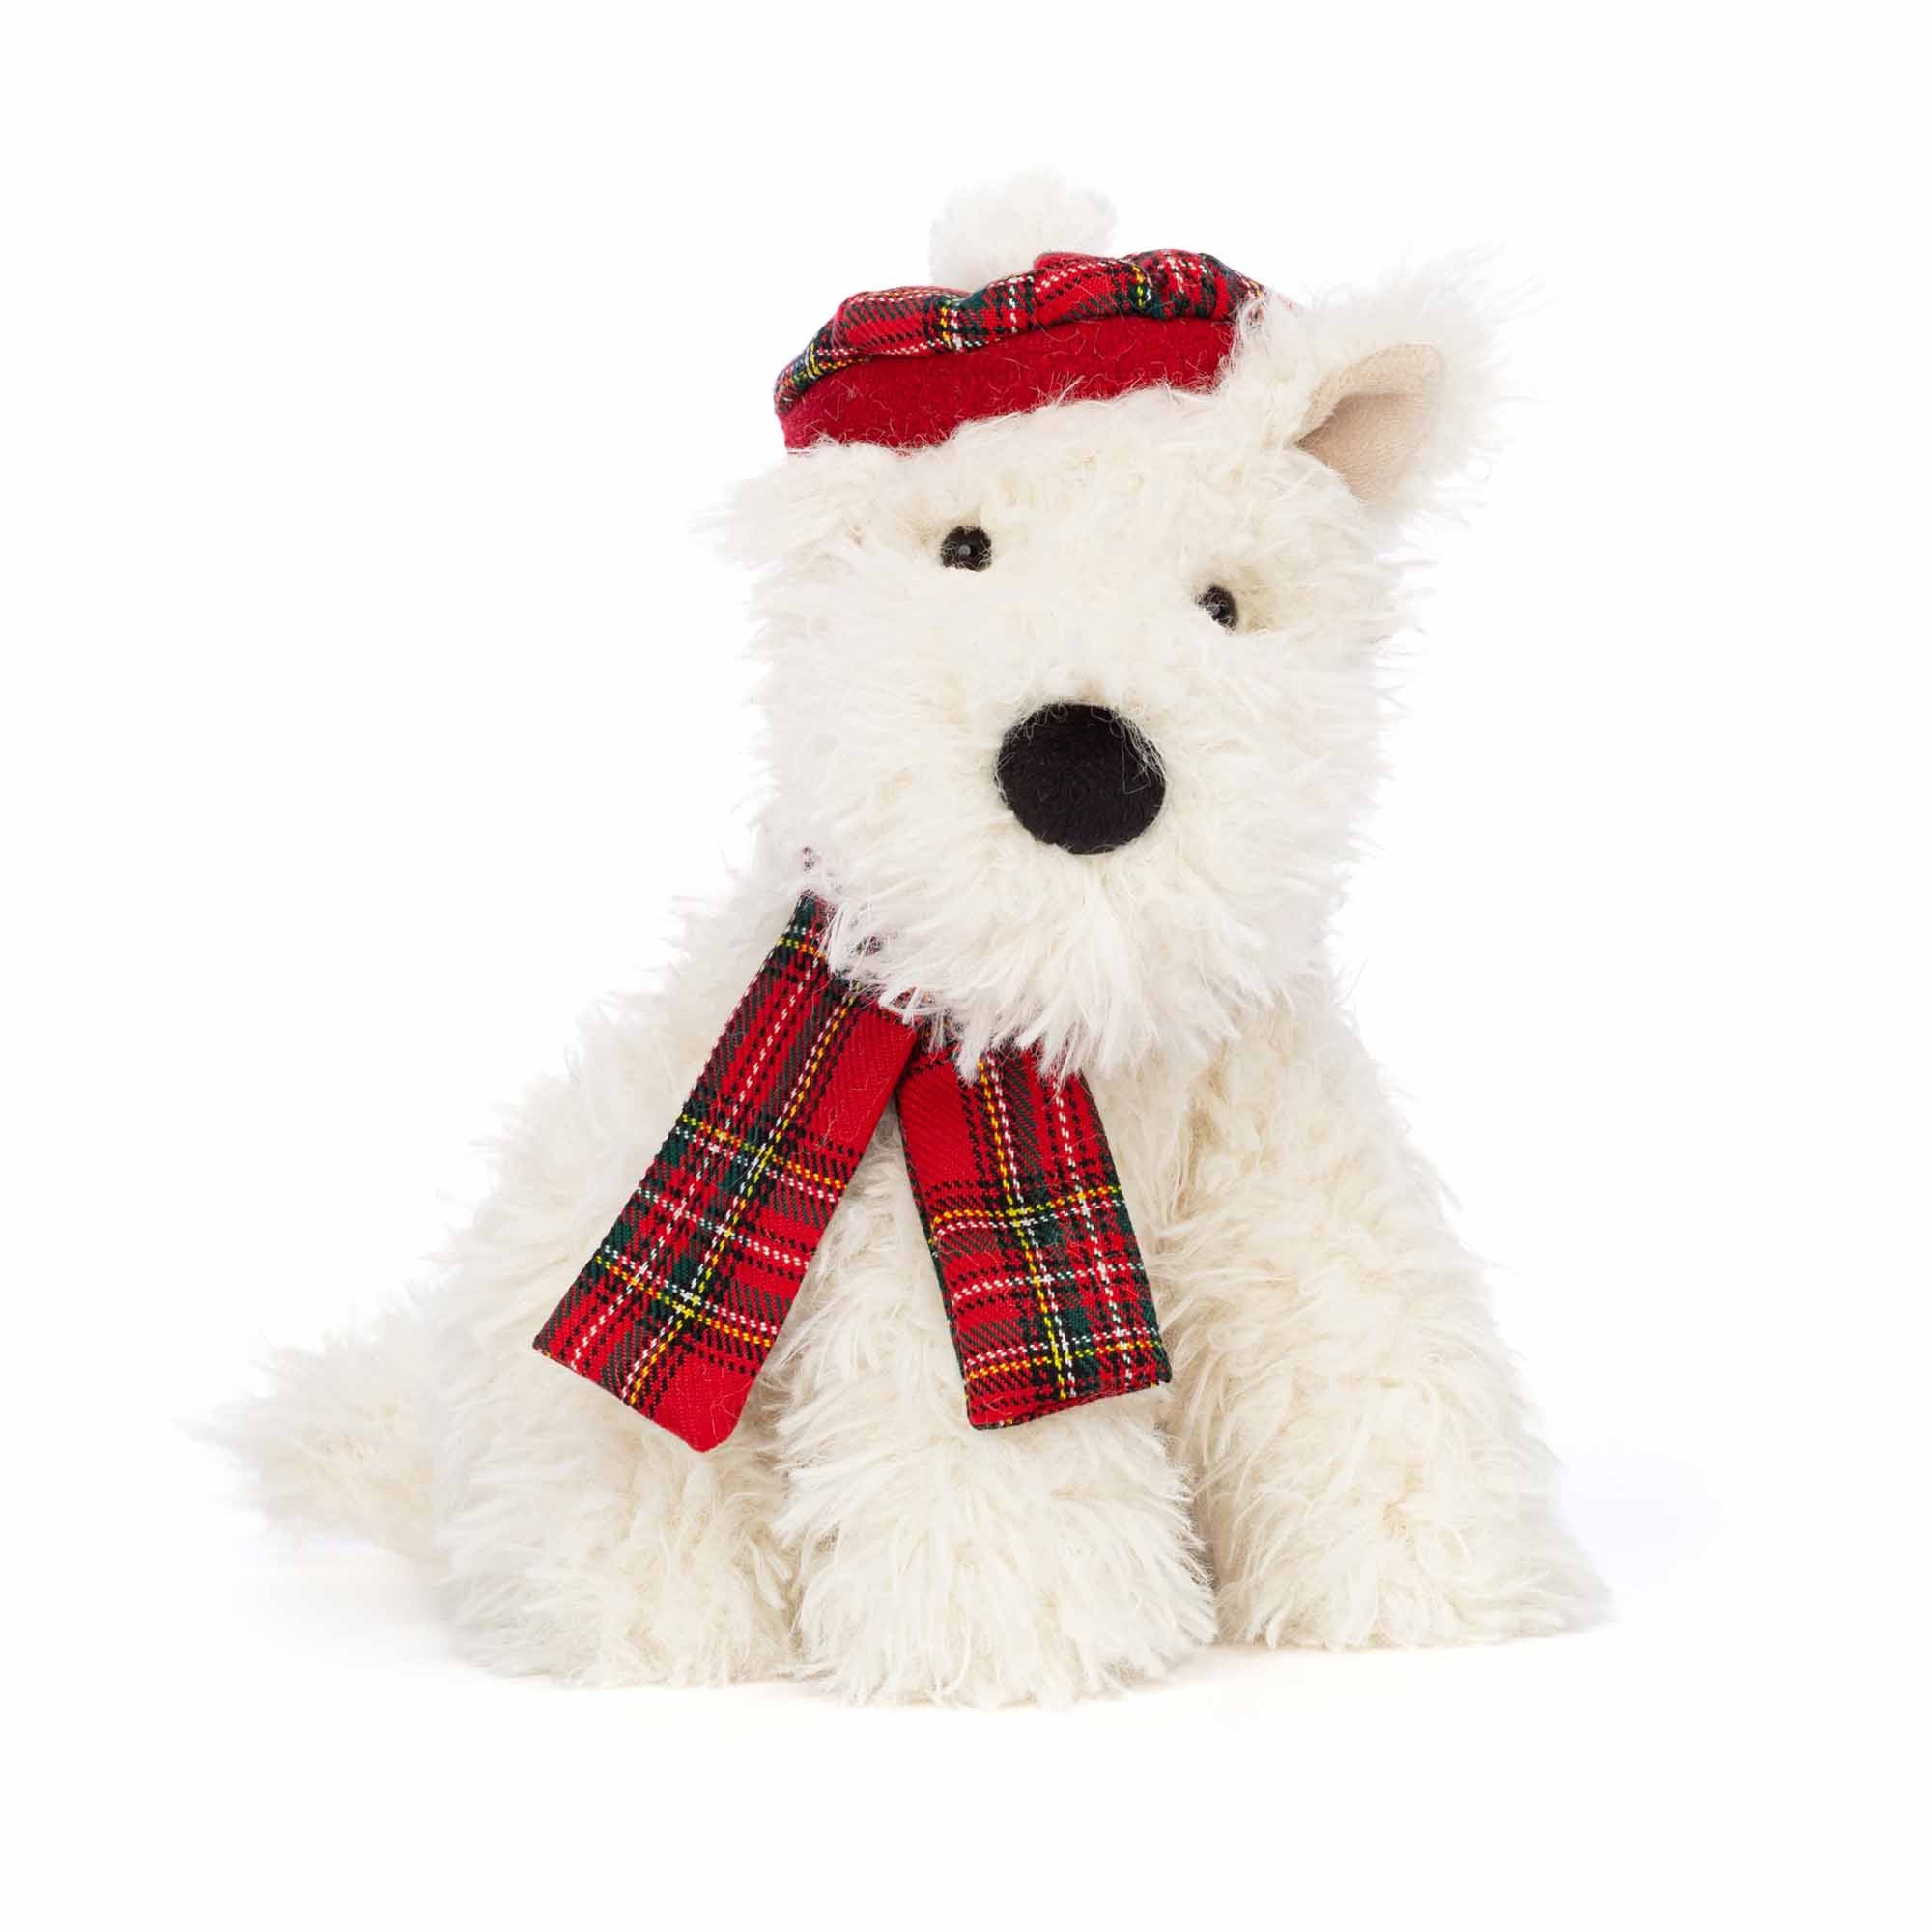 jellycat white fur munro scottie dog with red tartan hat and scarf